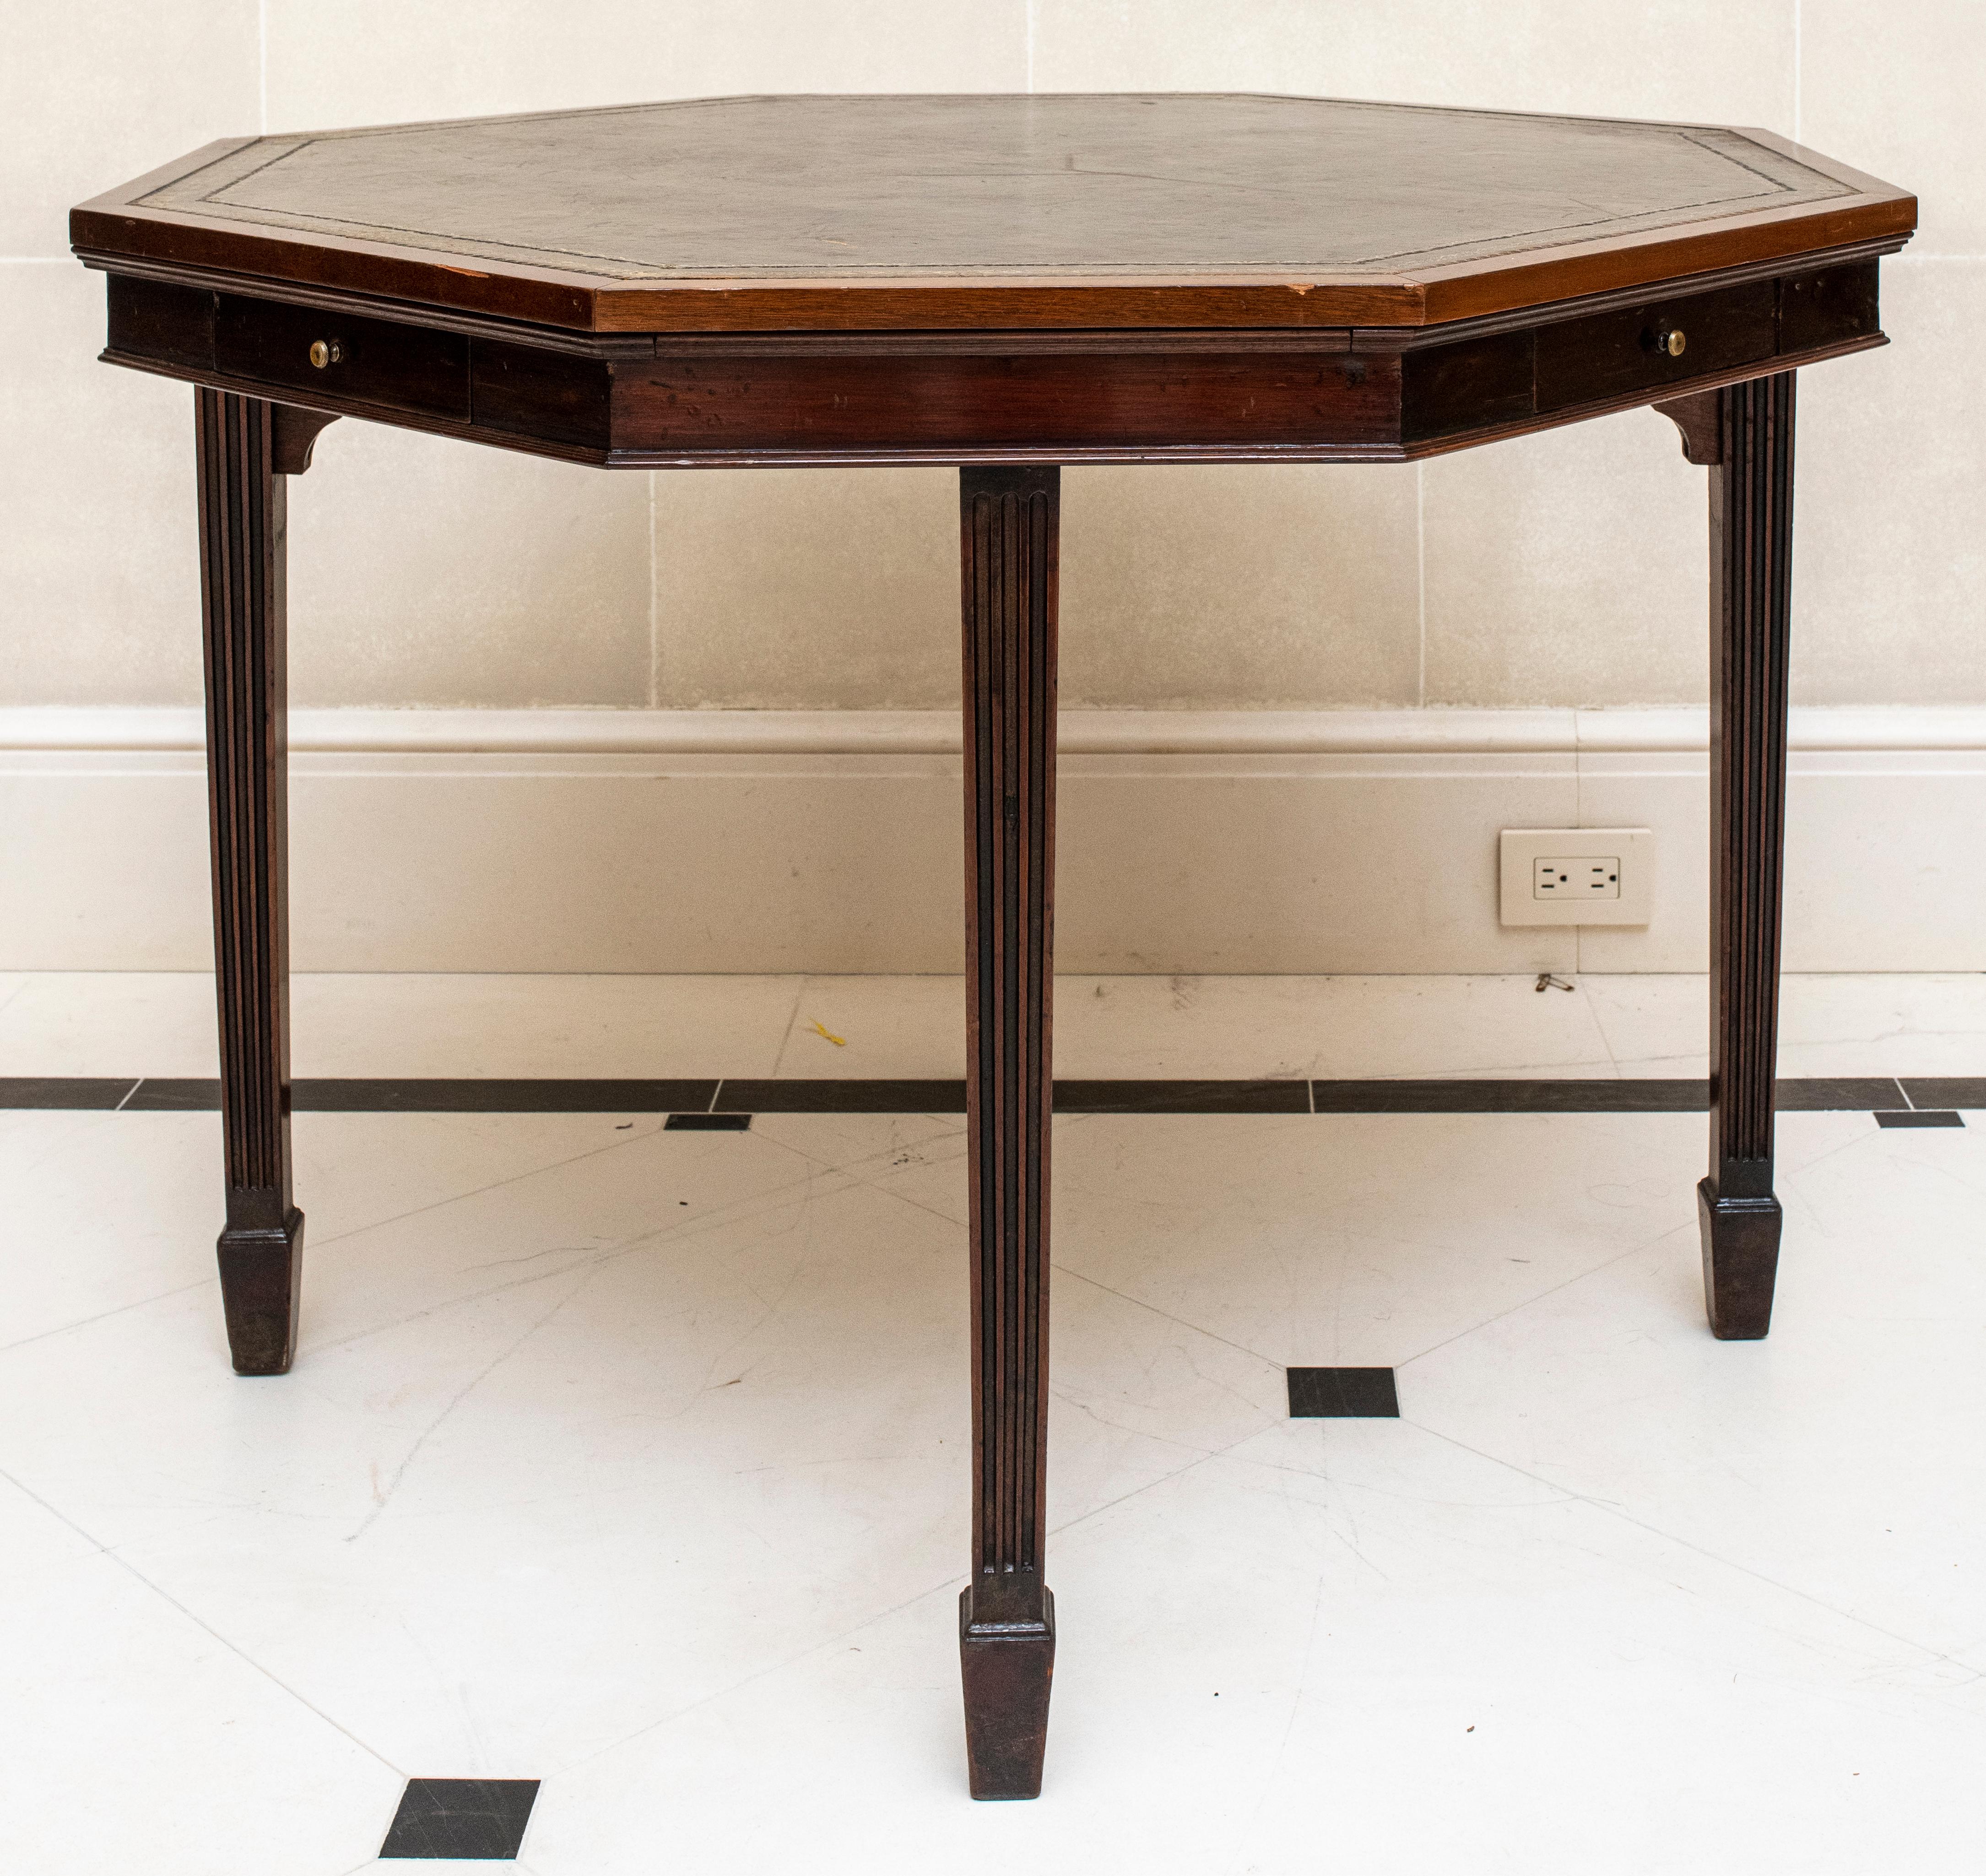 Trollope & Colls English octagonal mahogany bridge card table with drawers and tooled leather top, makers mark on drawer, early 20th century.